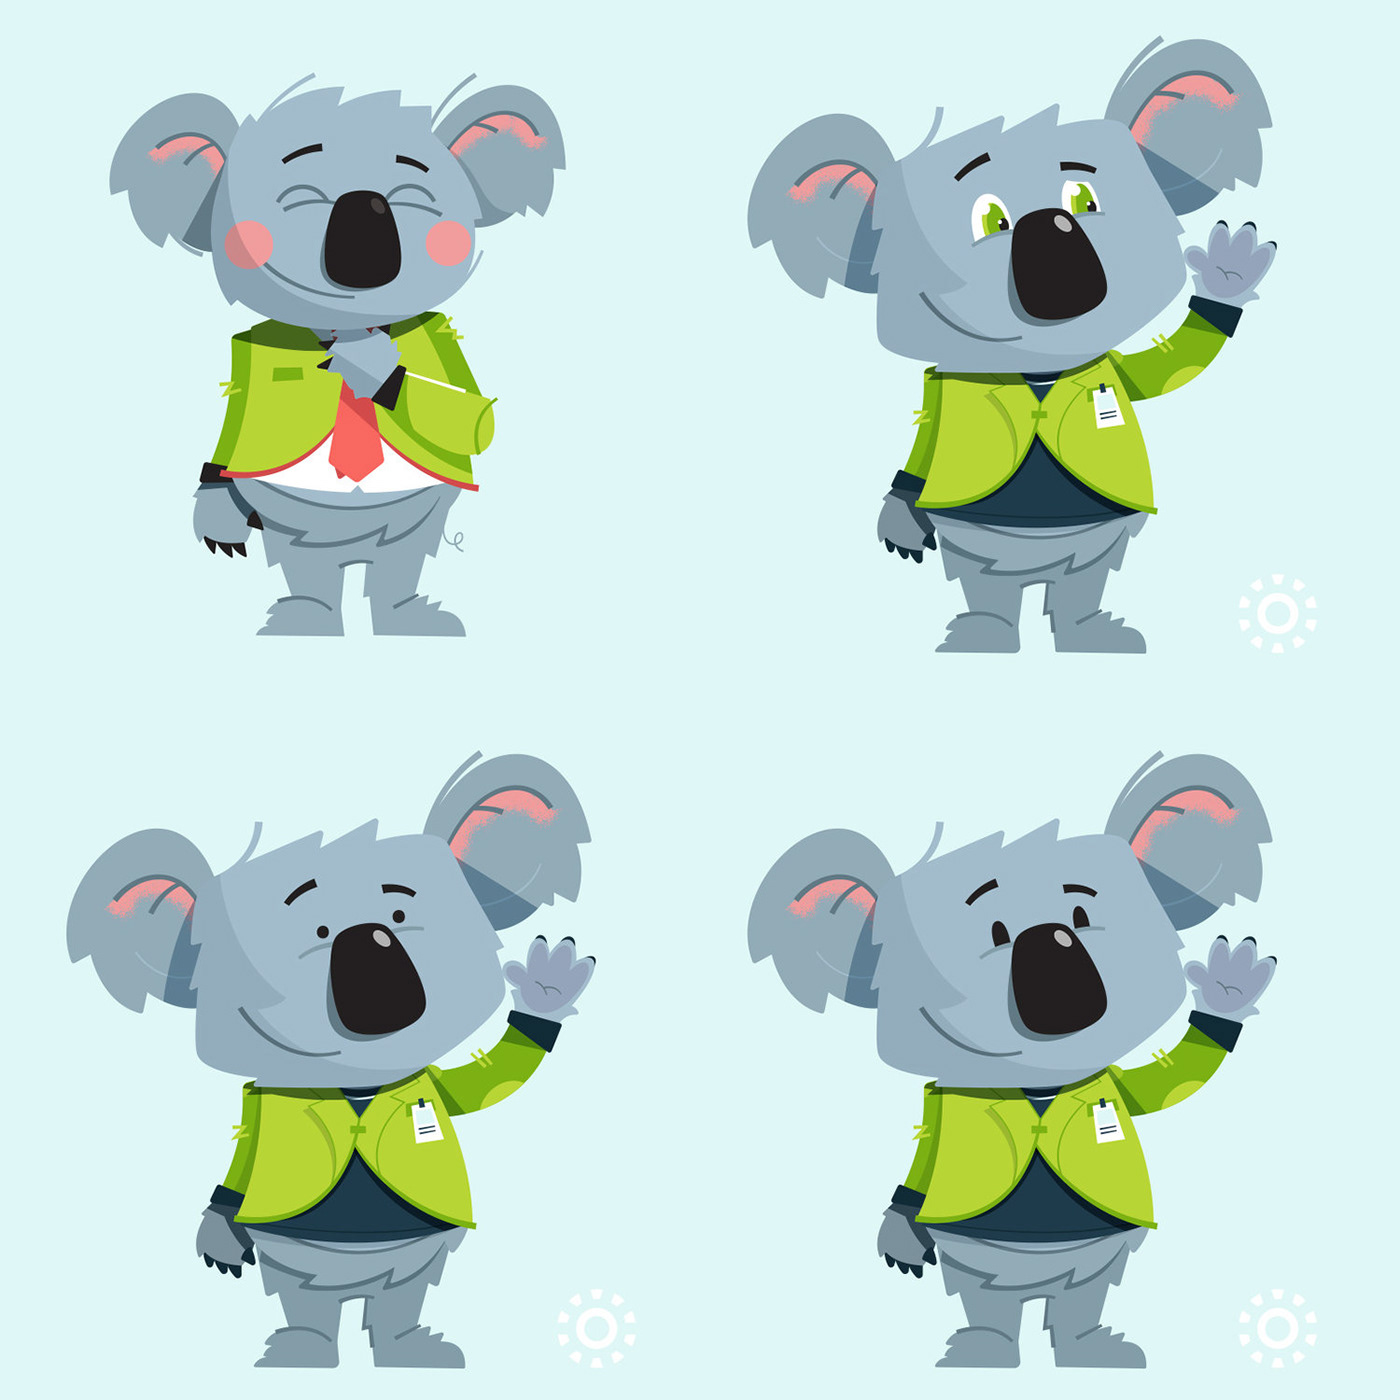 Koala bear dressed in a suit and tie